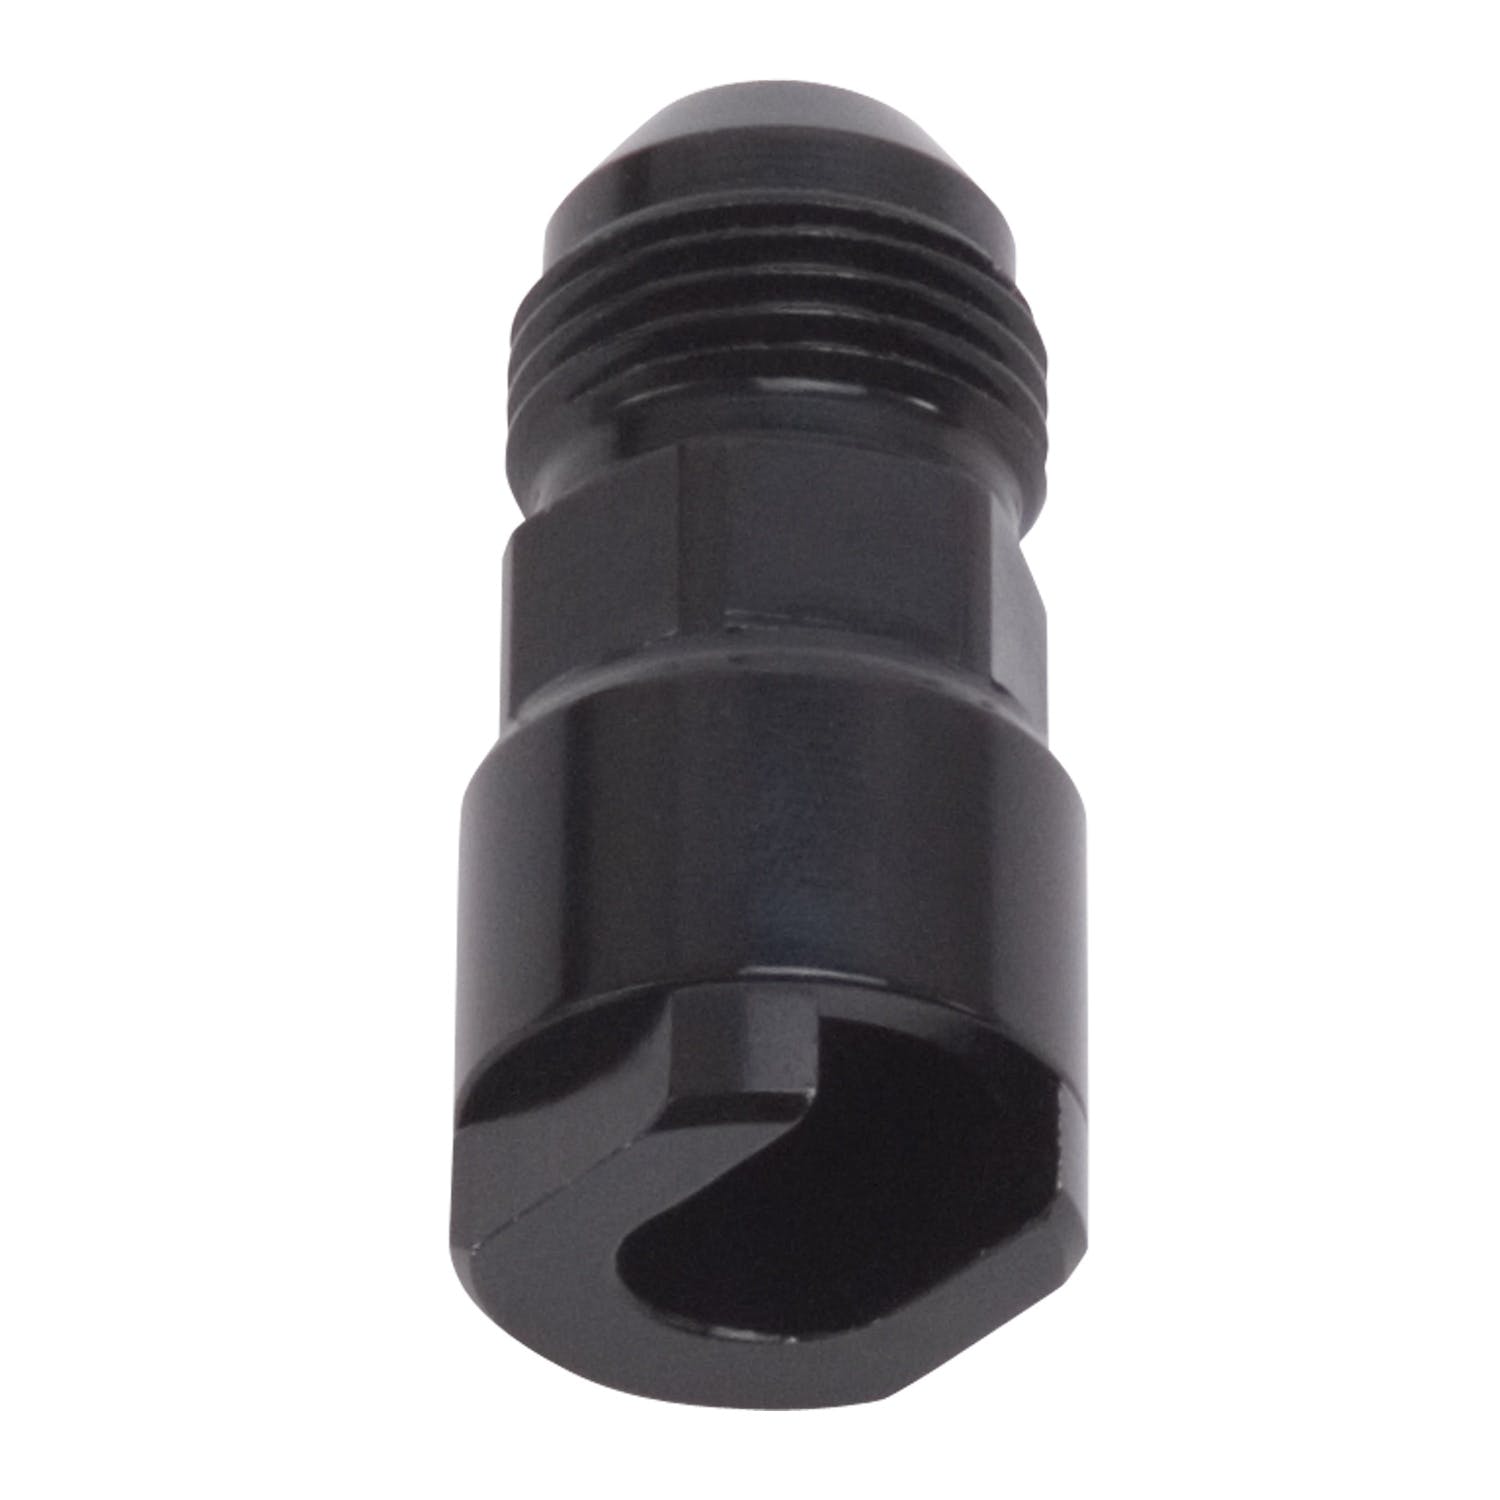 Russell 644133 EFI Adapter Fitting -8 AN Male to 3/8” SAE Quick-Disconnect Female Screw